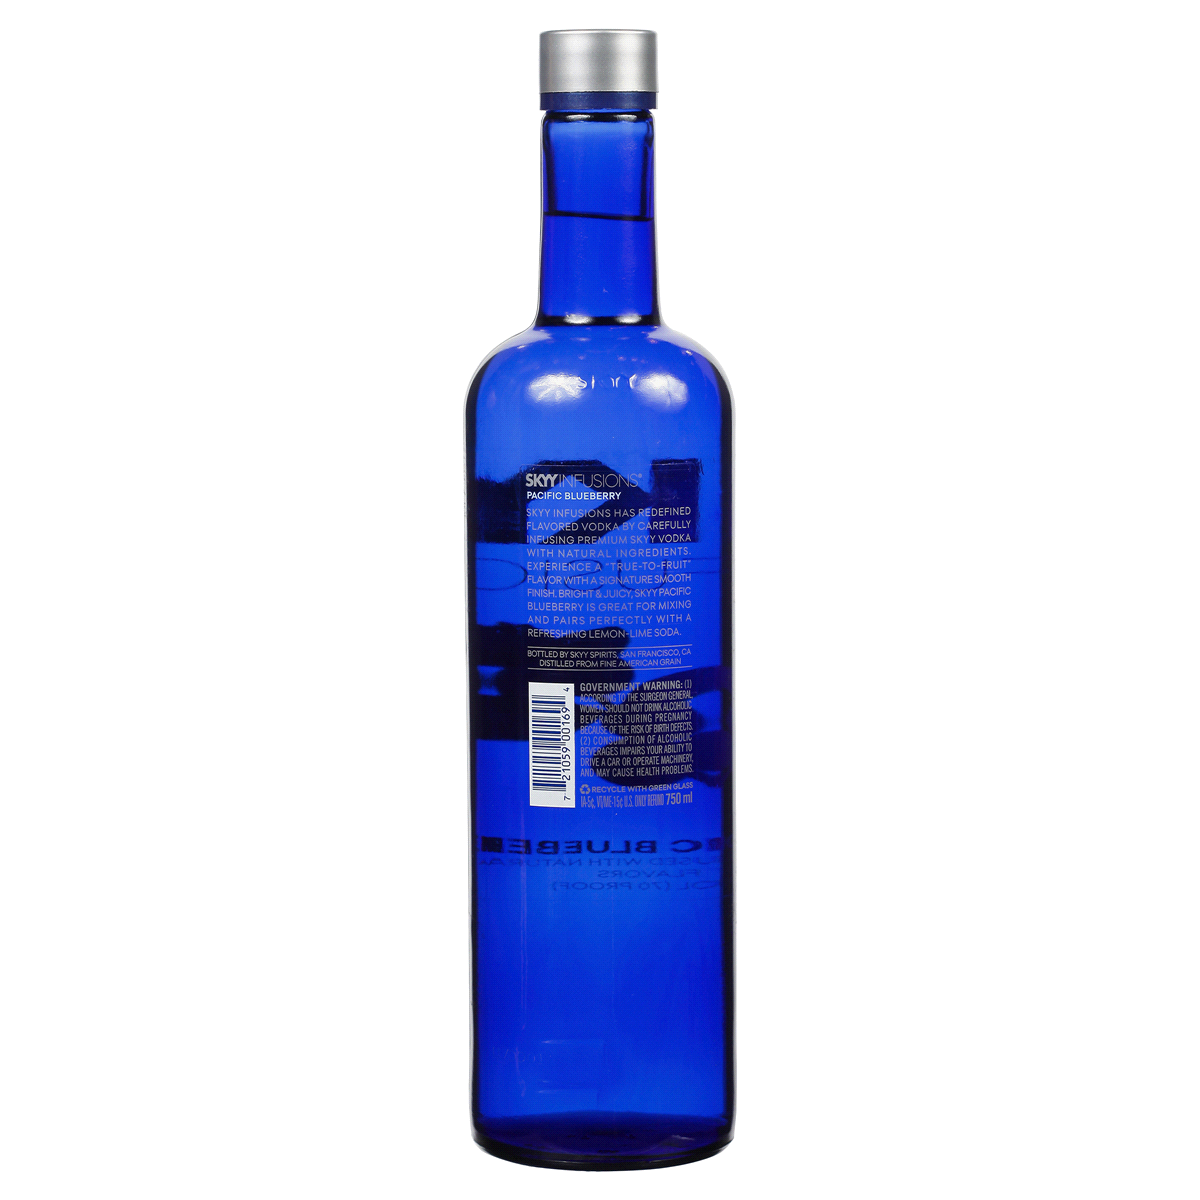 Skyy Infusions Pacific Blueberry Vodka 750 ml | Shipt